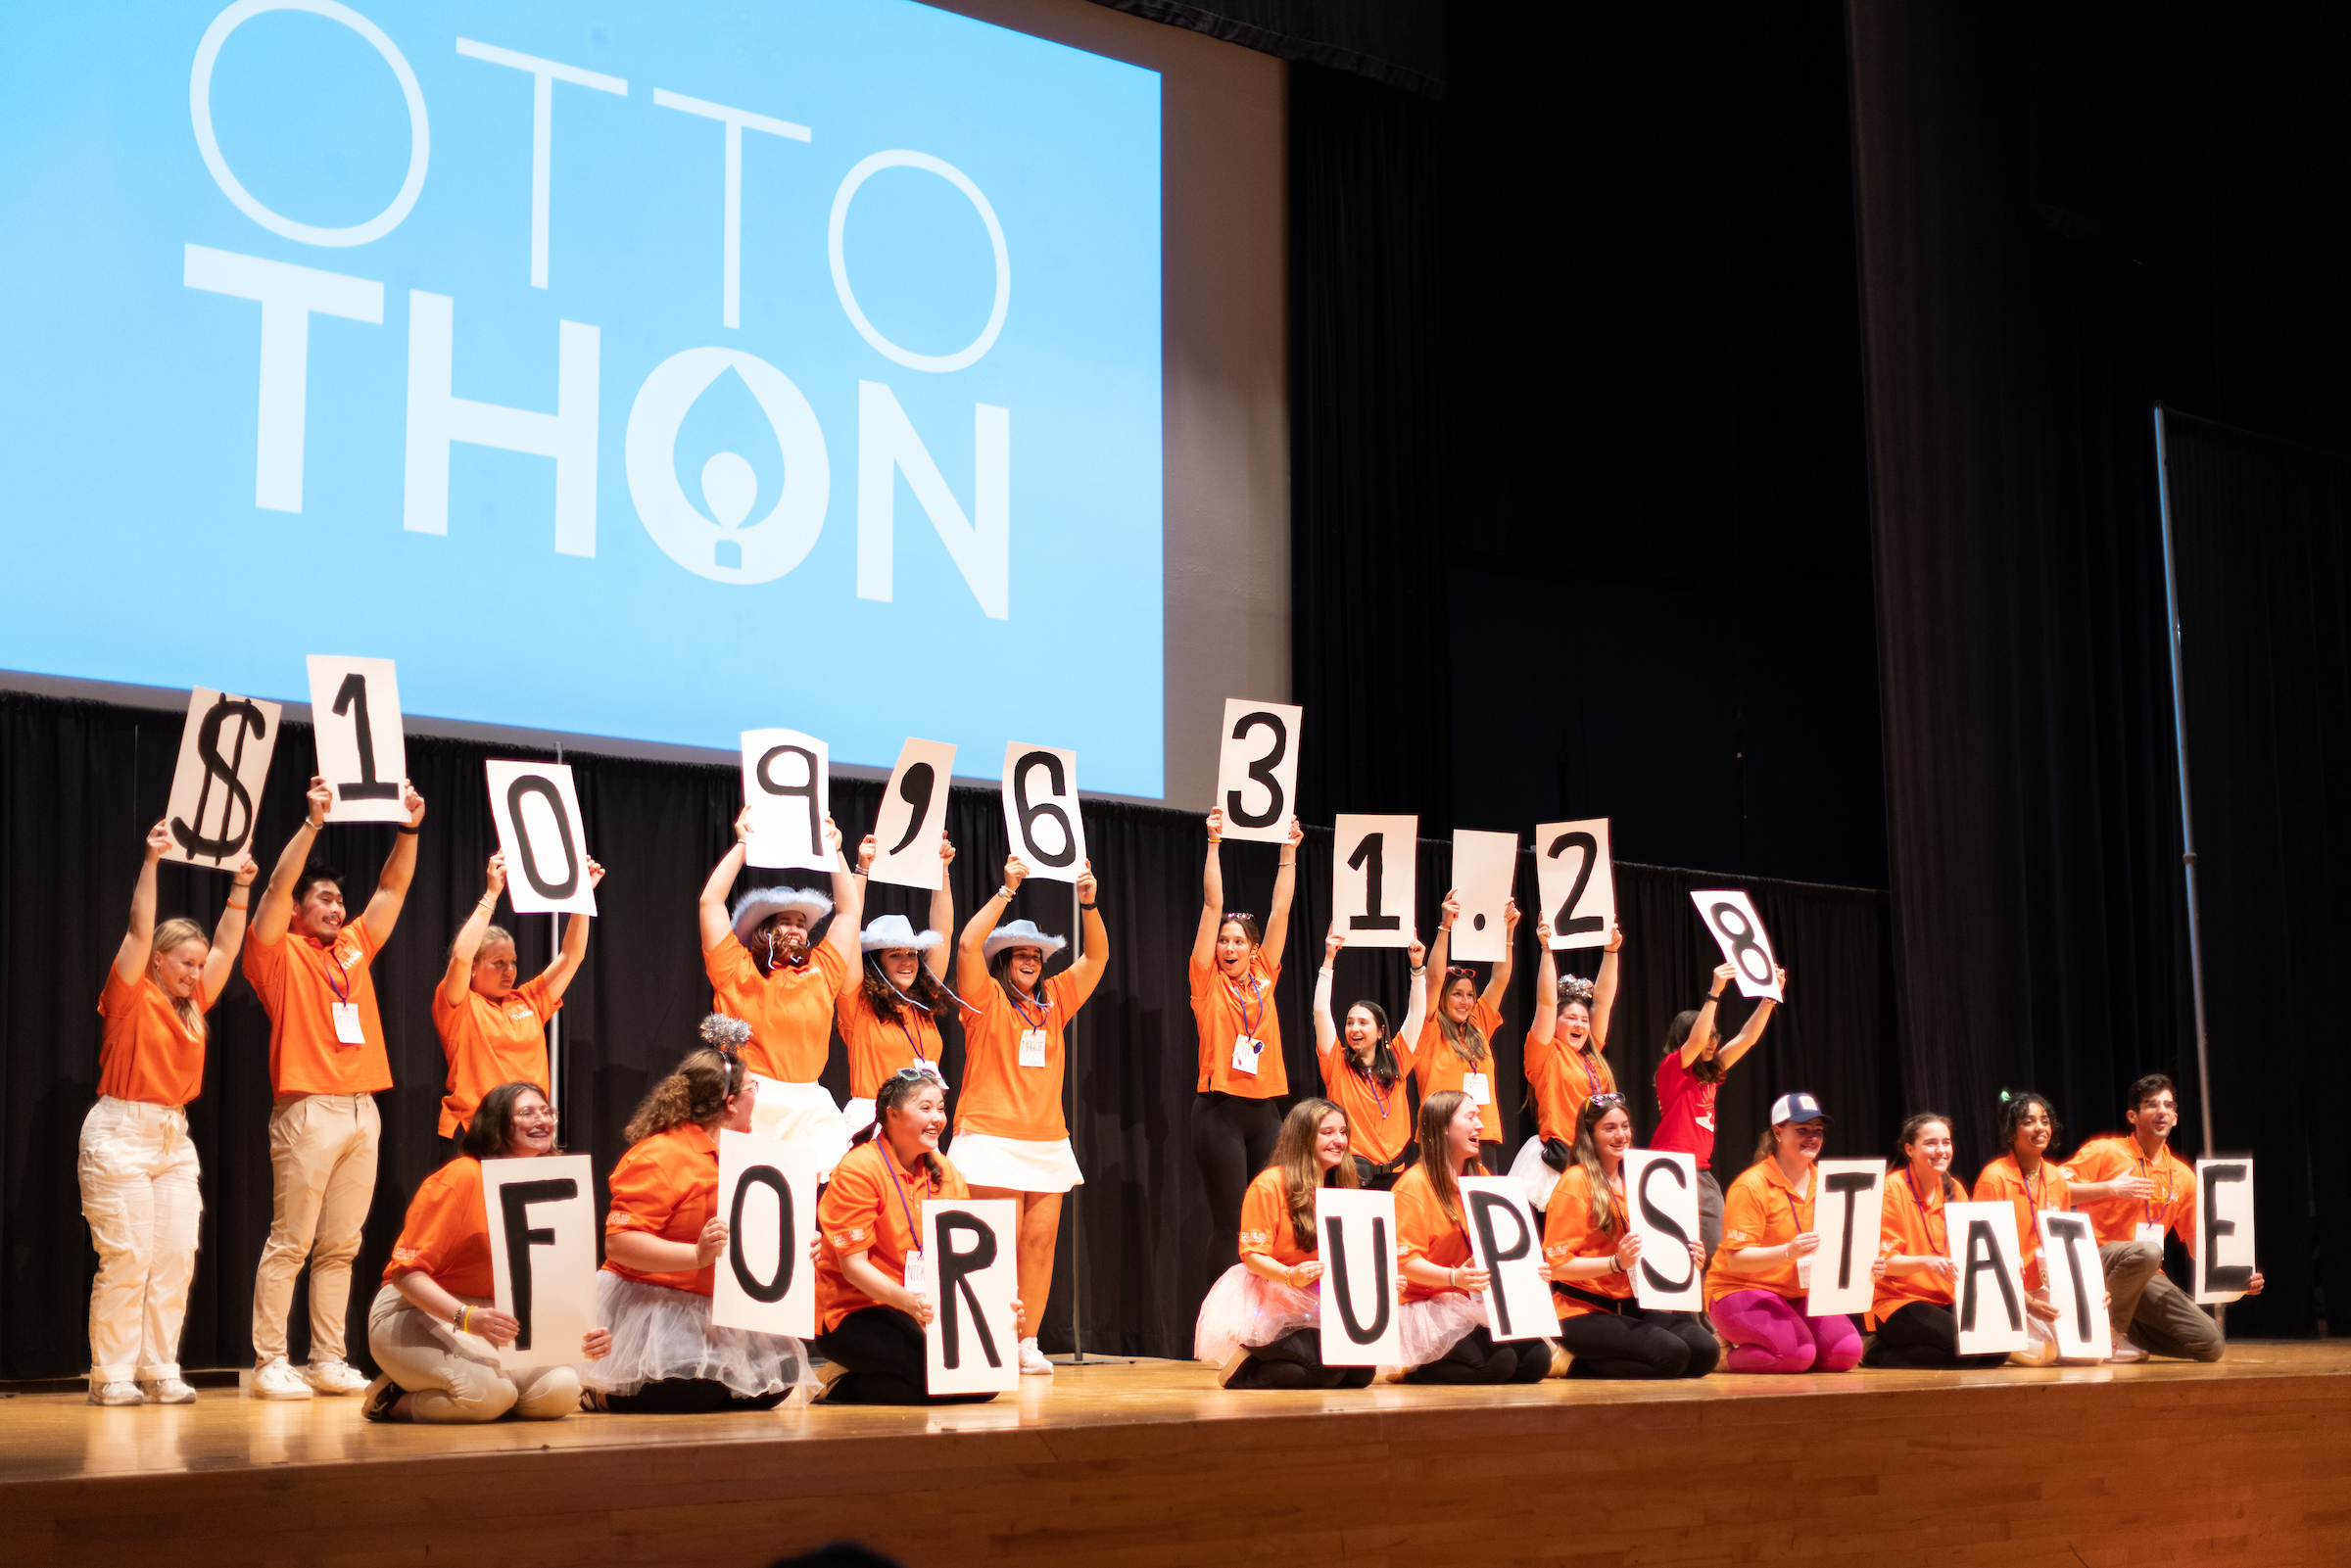 group of people sitting and standing on stage holding up placards that represent $109,631.28 and For Upstate, in front of projection screen with text OttoThon